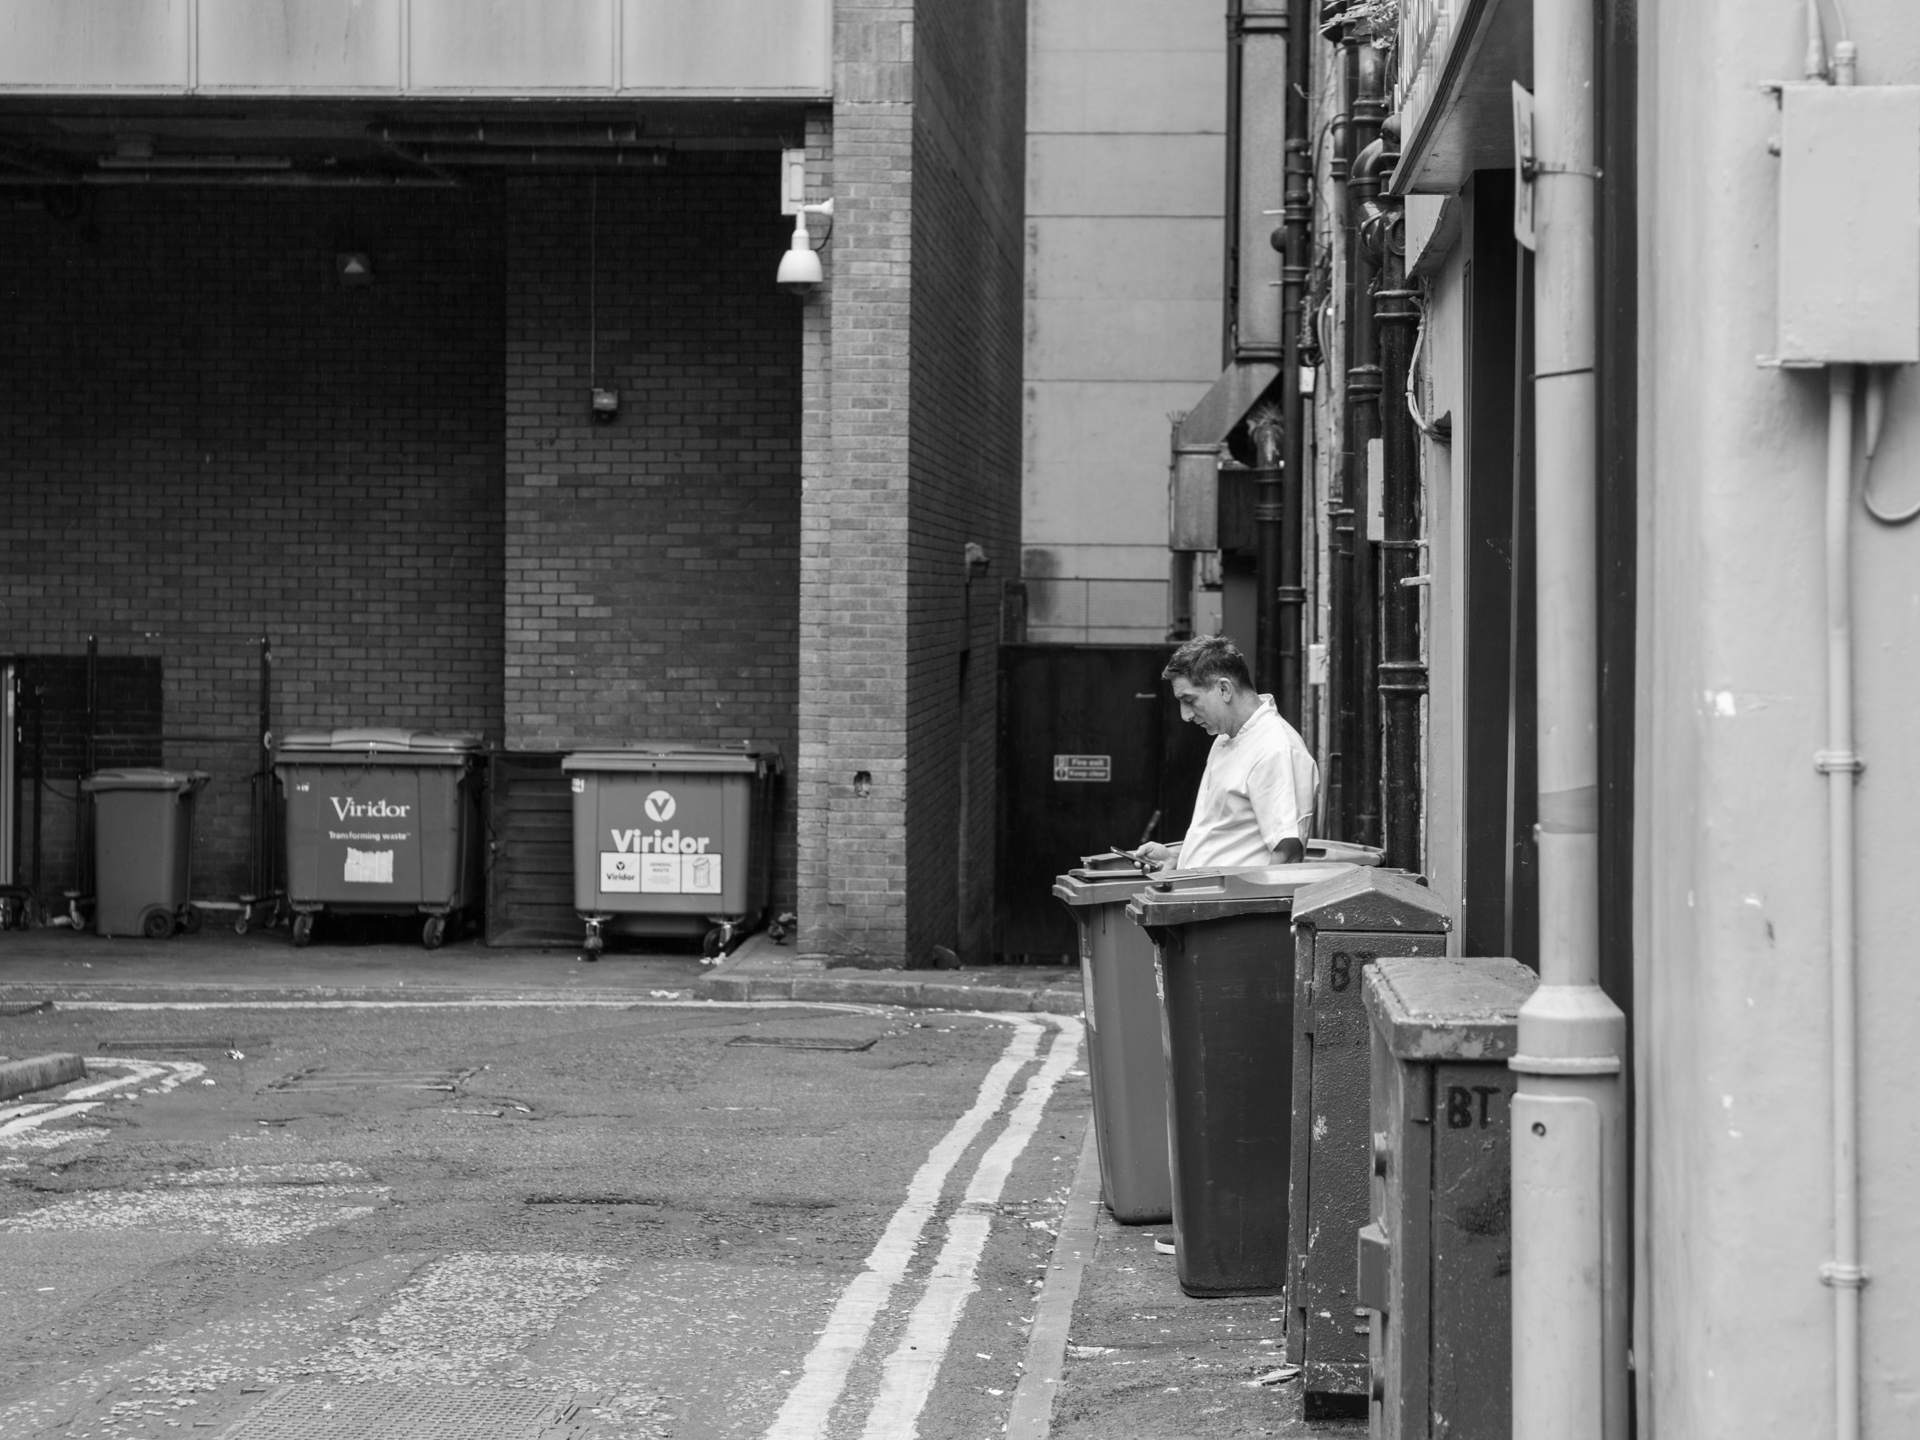 An employee steps out from the back of a kitchen for a break.